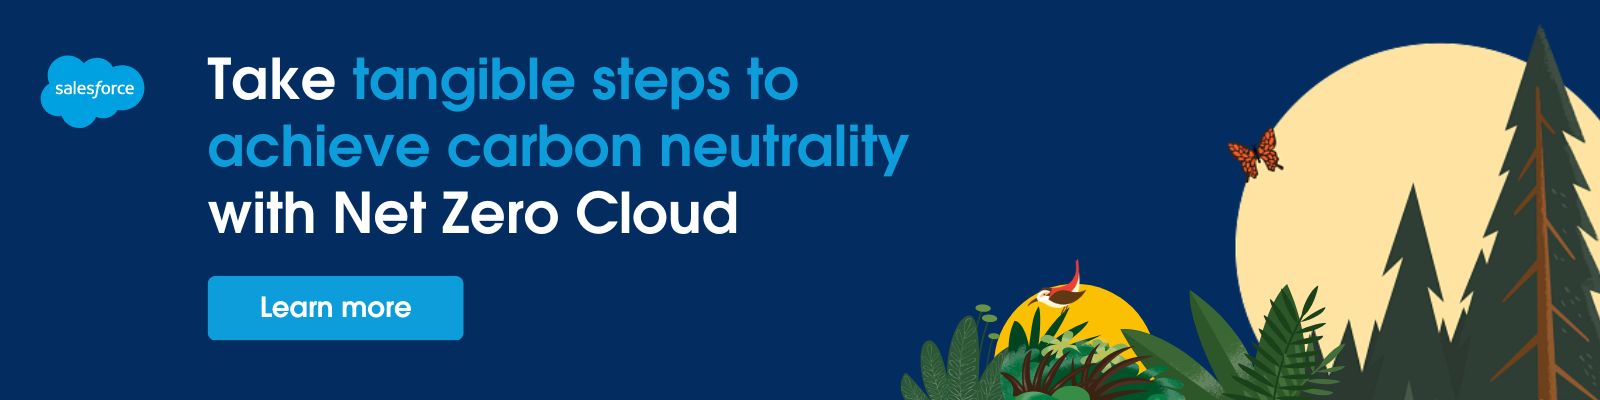 Take tangible steps to achieve carbon neutrality with Net Zero Cloud